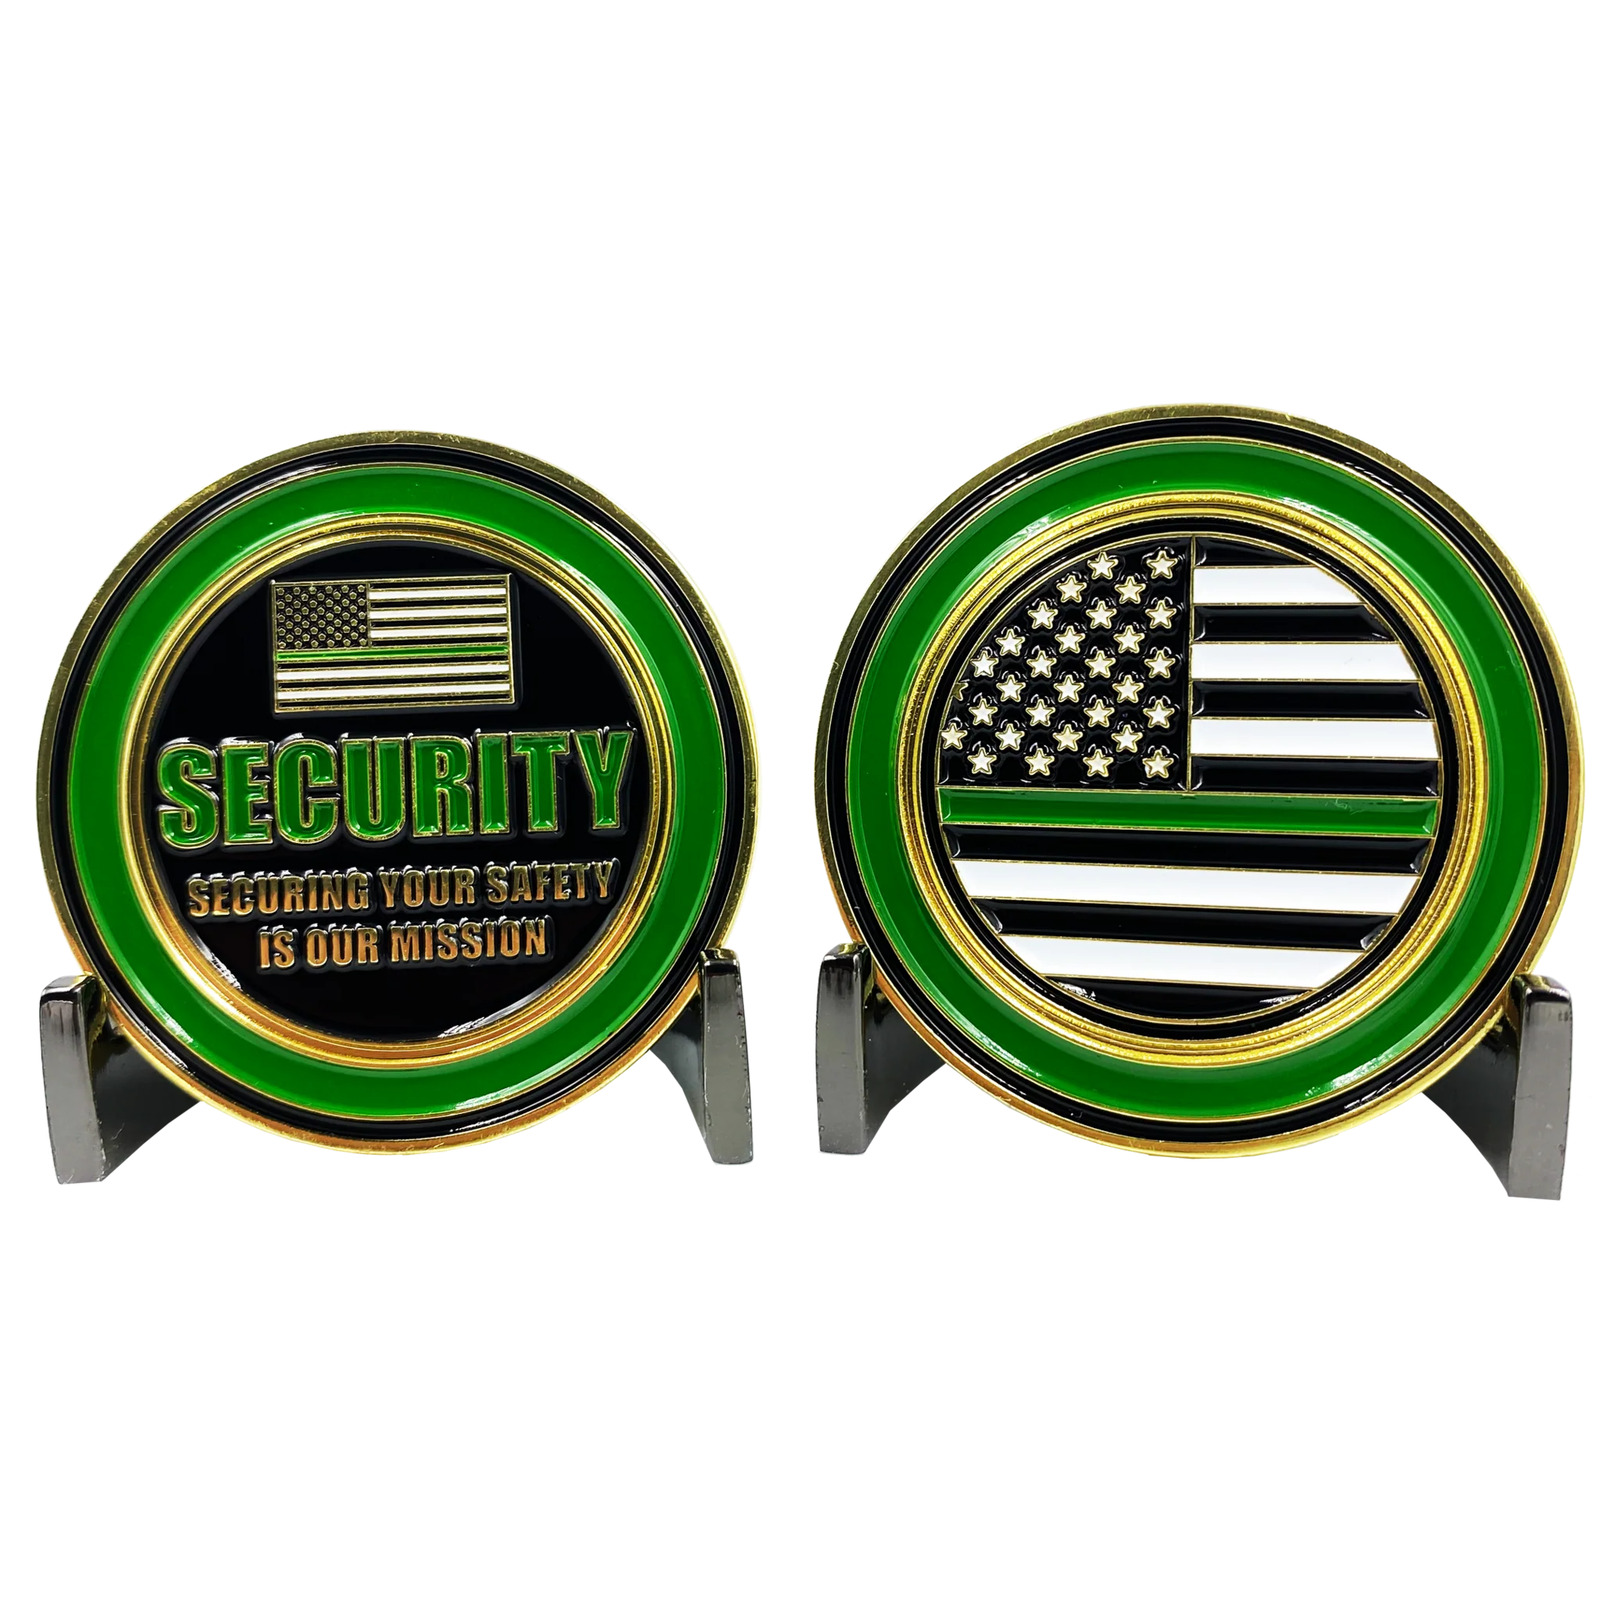 Thin Green Line Challenge Coin Security Enforcement Agent Officer Guard CL3-01